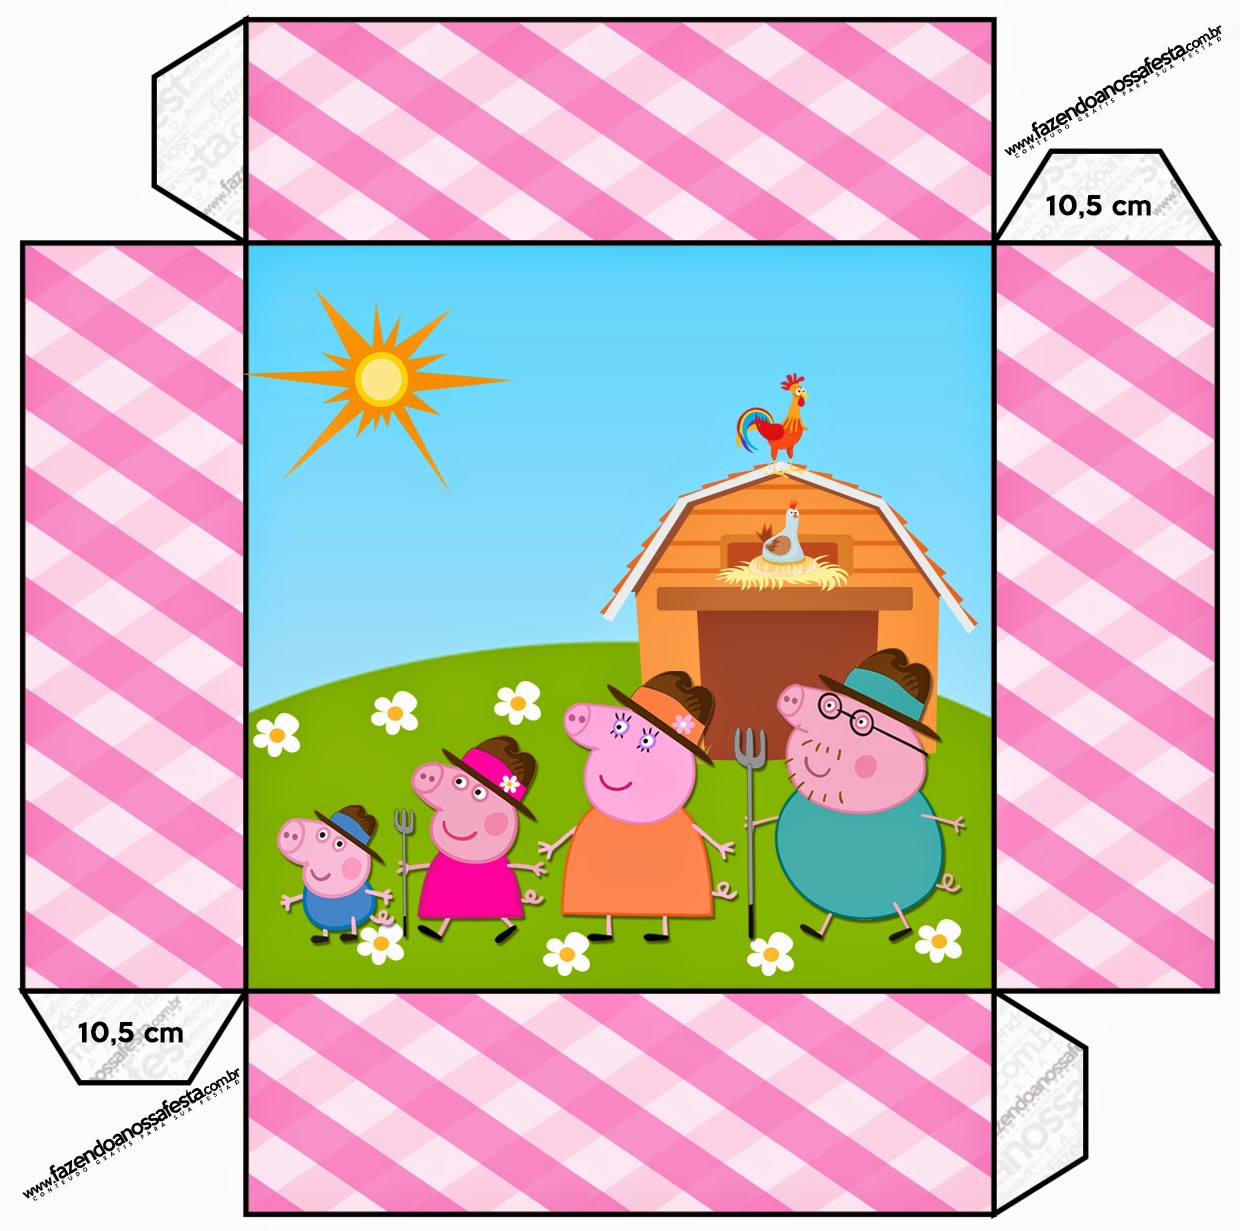 Peppa Pig At The Farm Free Printable Boxes. | Oh My Fiesta! In English - Peppa Pig Character Free Printable Images